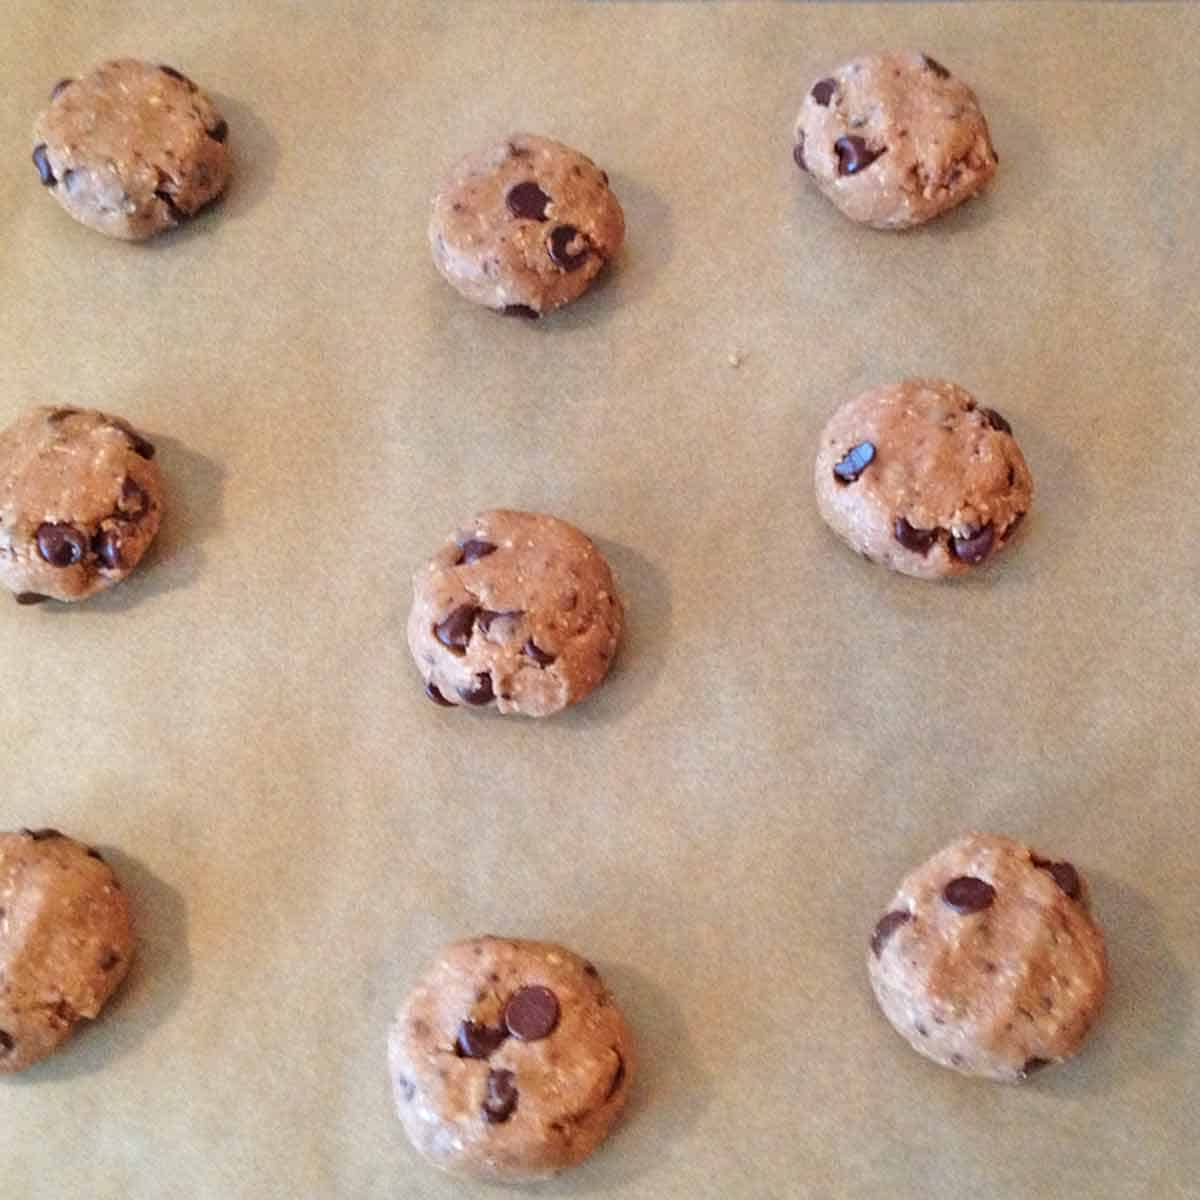 Flattened chocolate chip cookie balls on a baking sheet ready to cook in the oven.